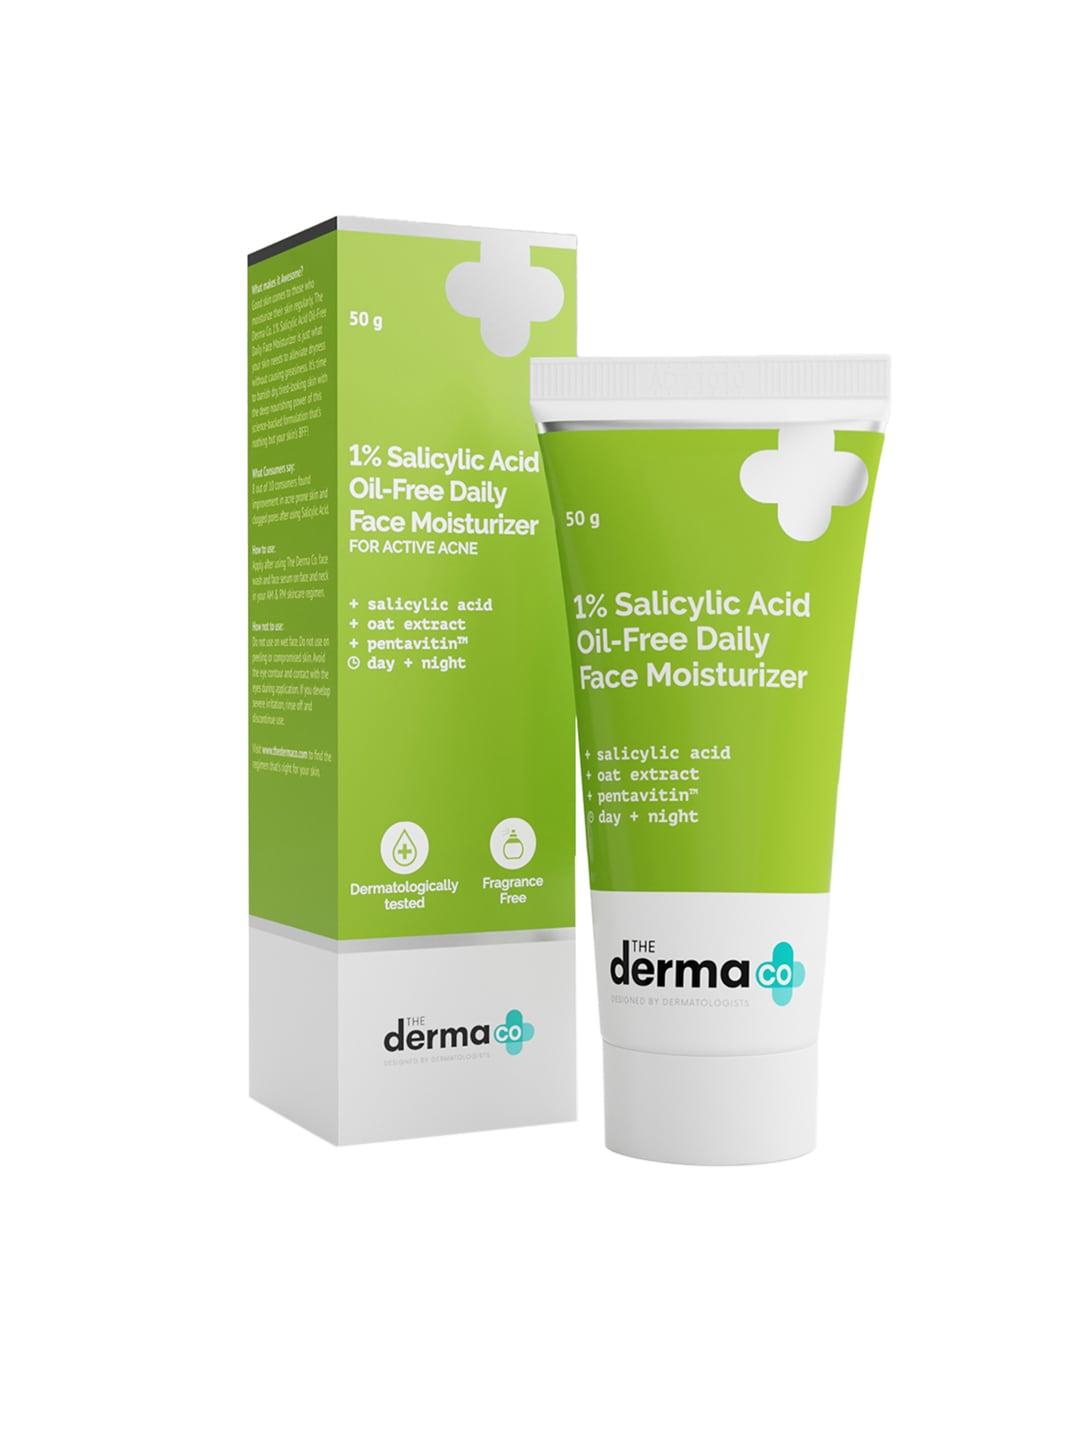 the derma co.1% salicylic acid oil-free moisturizer with oat extract for active acne - 50g